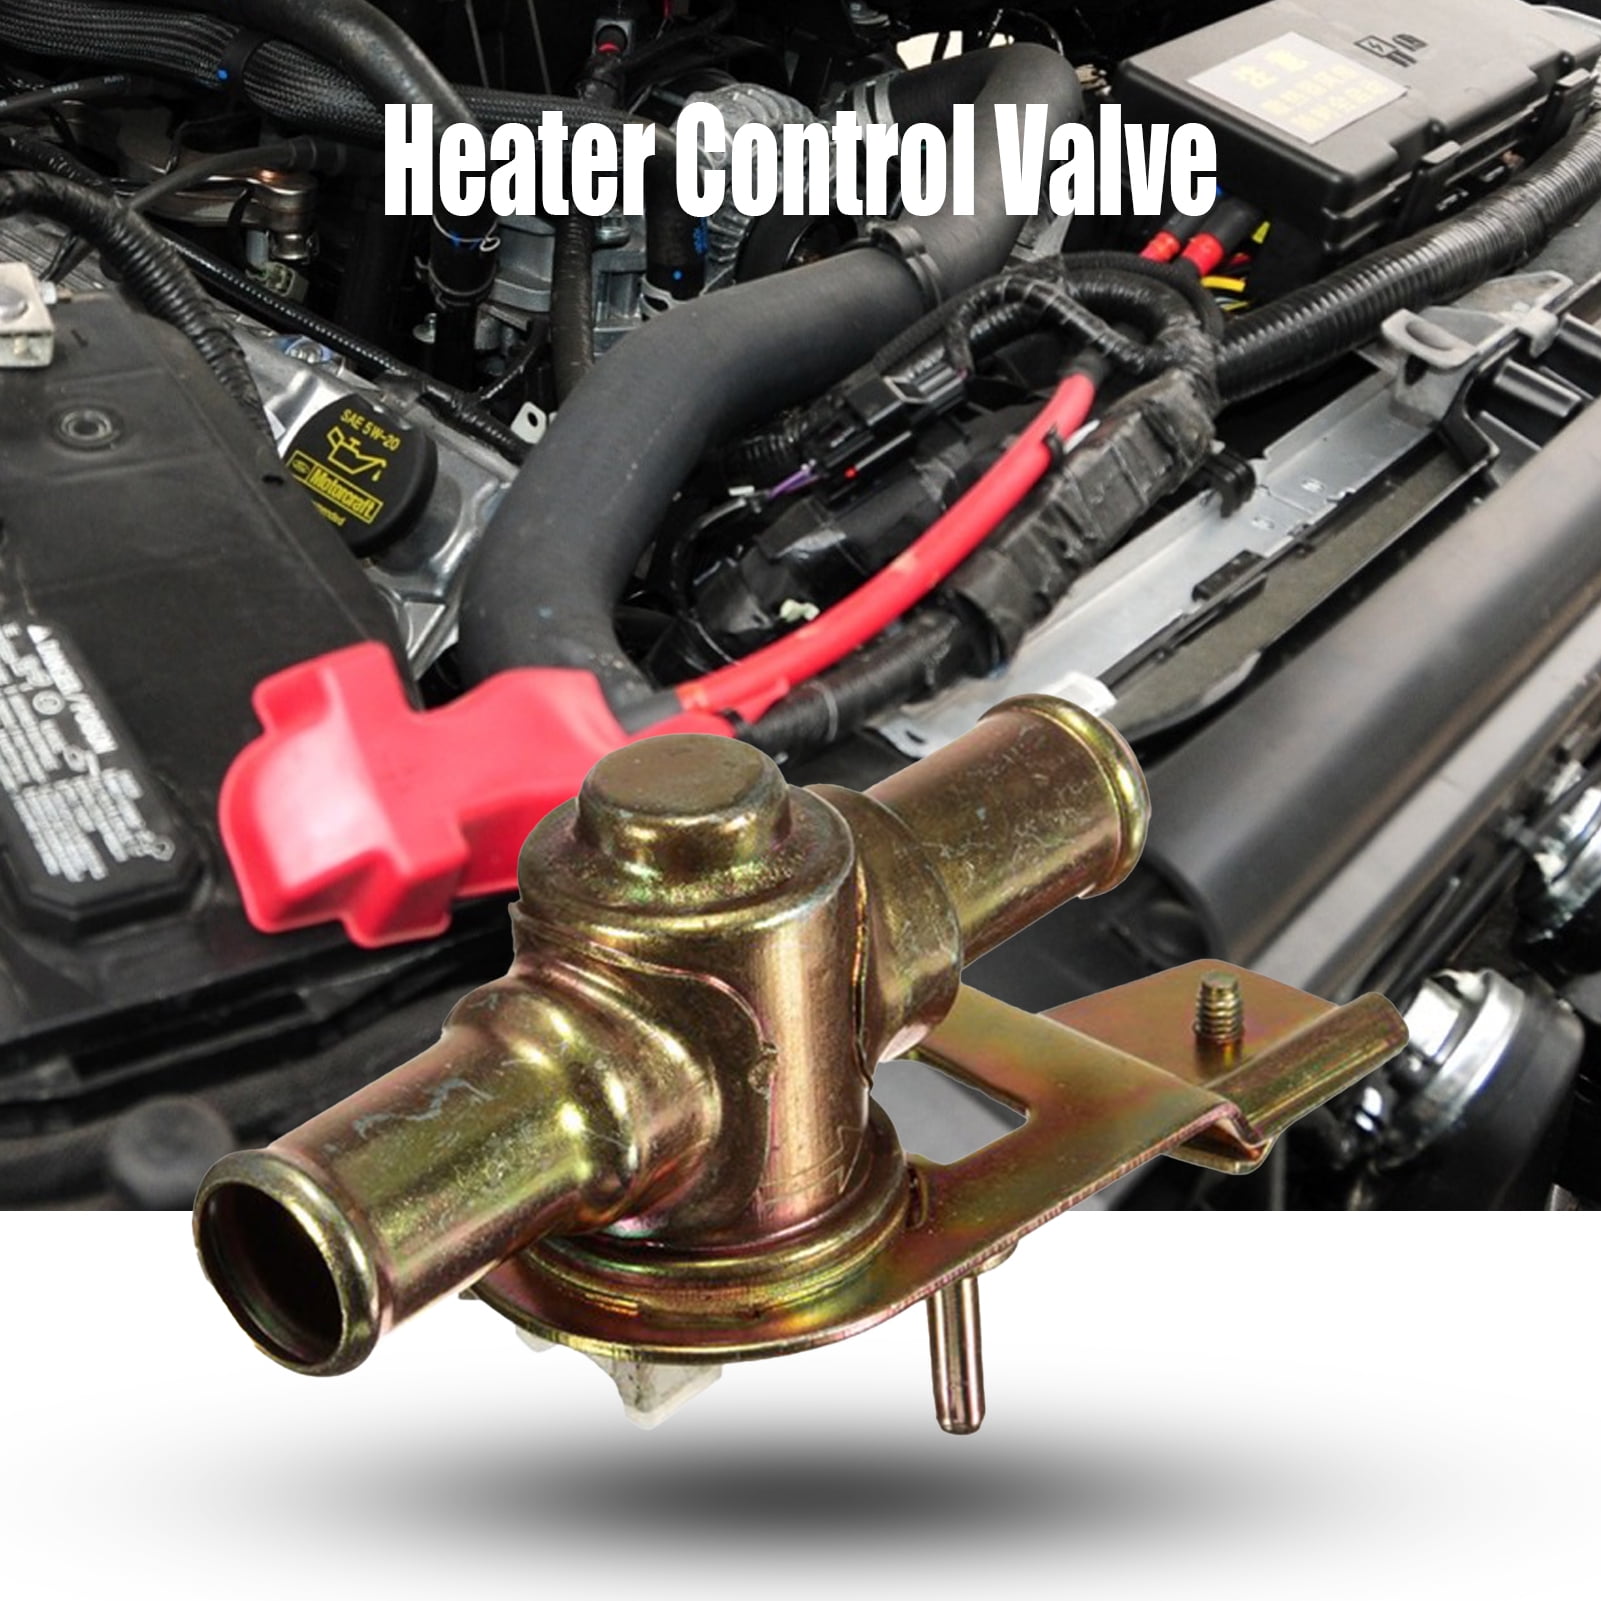 Naierhg Heater Control Valve Gold Plated Push to Close Aluminum Alloy Car  Heater Valve Replacement C3UZ18495A YG133 for Ford E F Series 